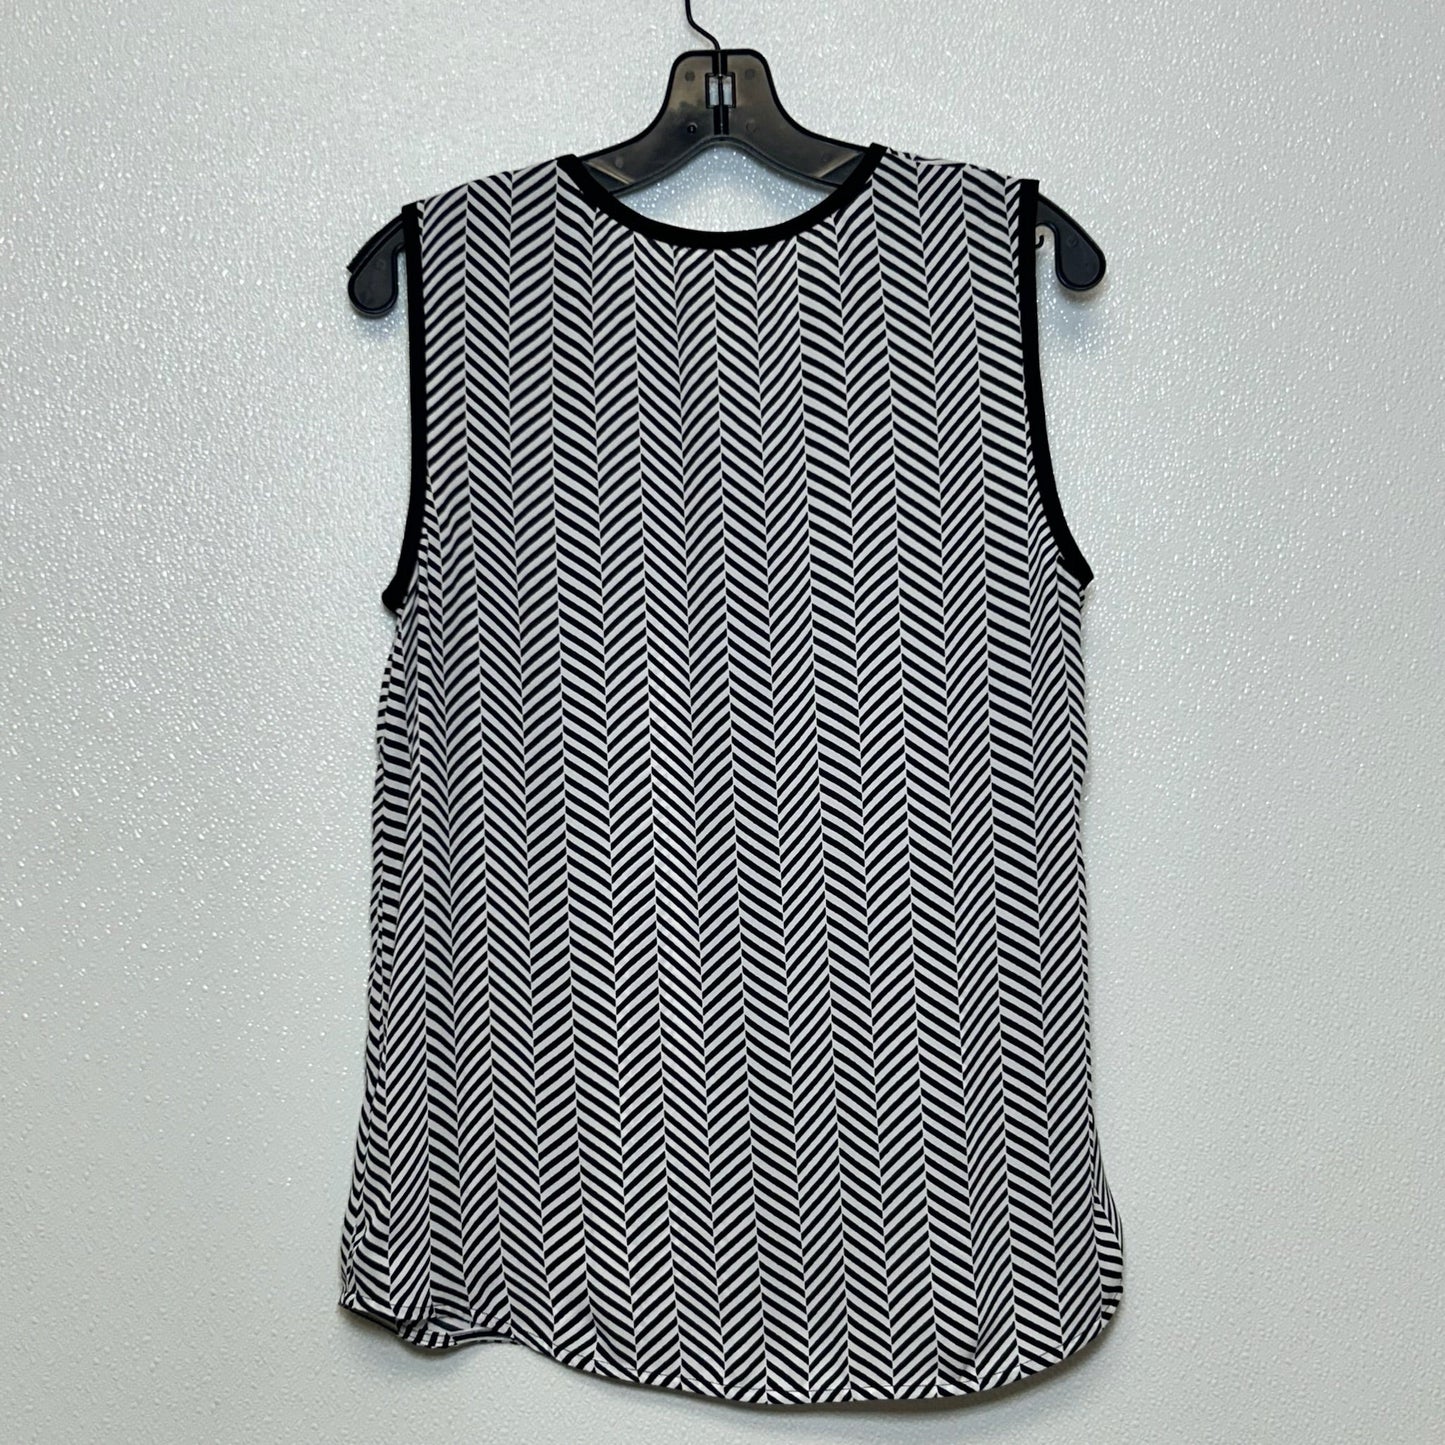 Black White Top Sleeveless Vince Camuto, Size S